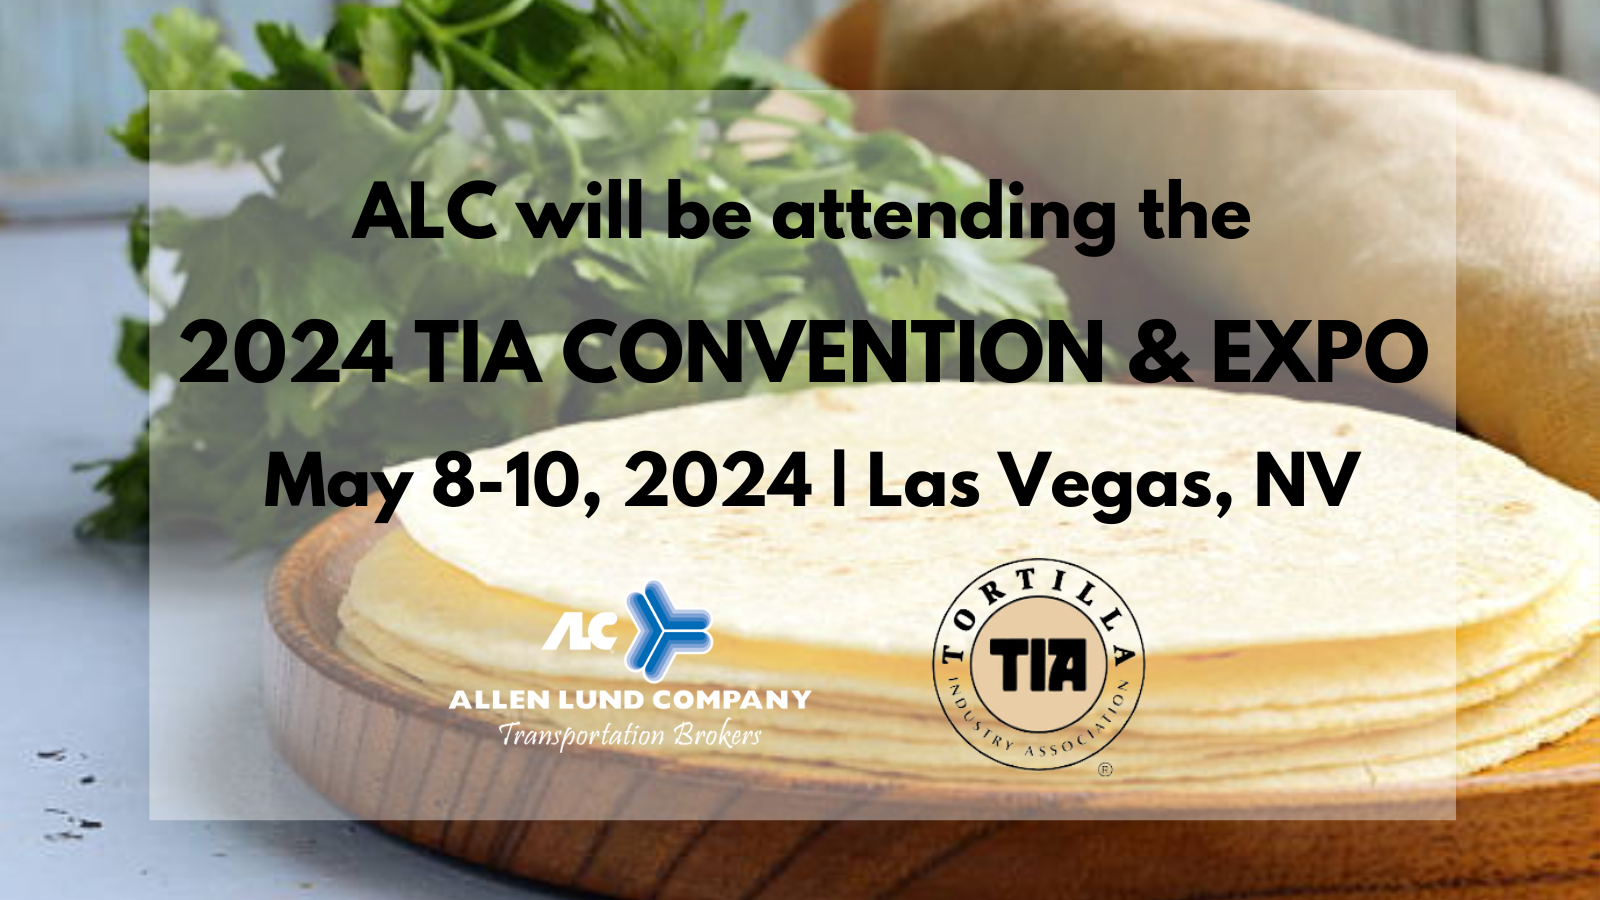 ALC will be attending the 2024 Tortilla Industry Association Convention & Expo